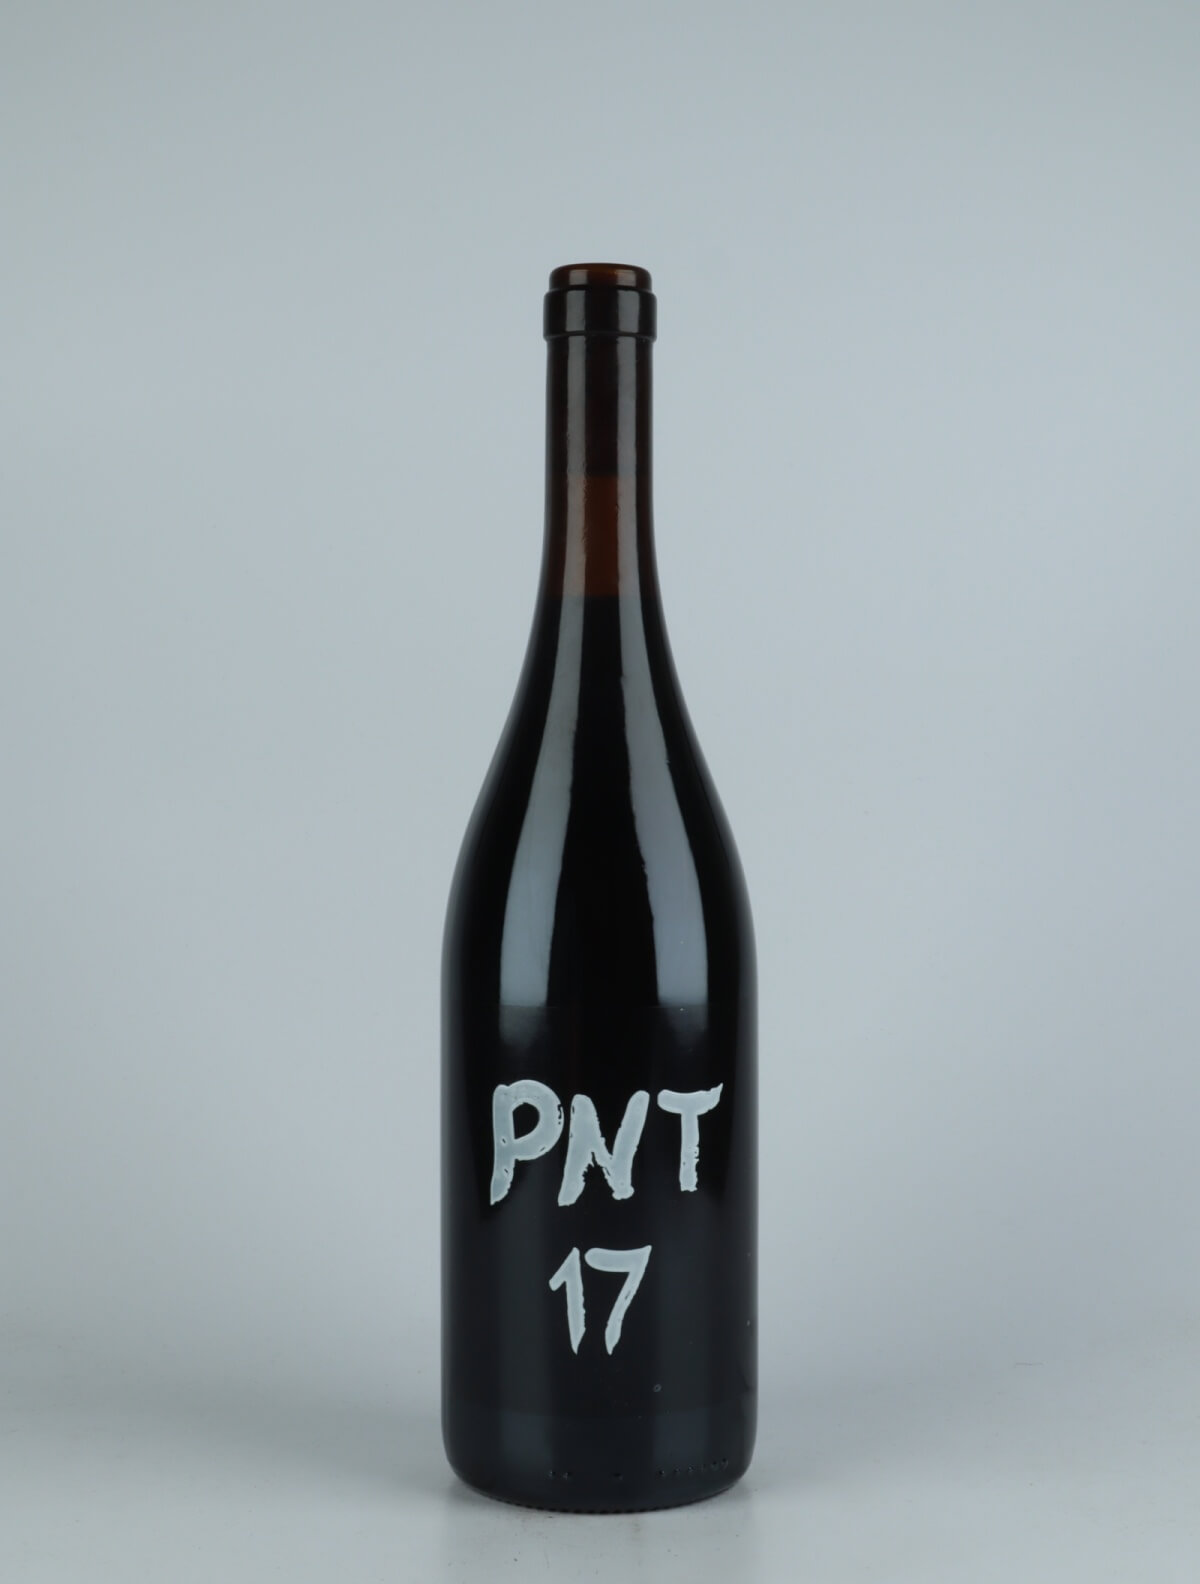 A bottle  PNT Red wine from Le Coste, Lazio in Italy